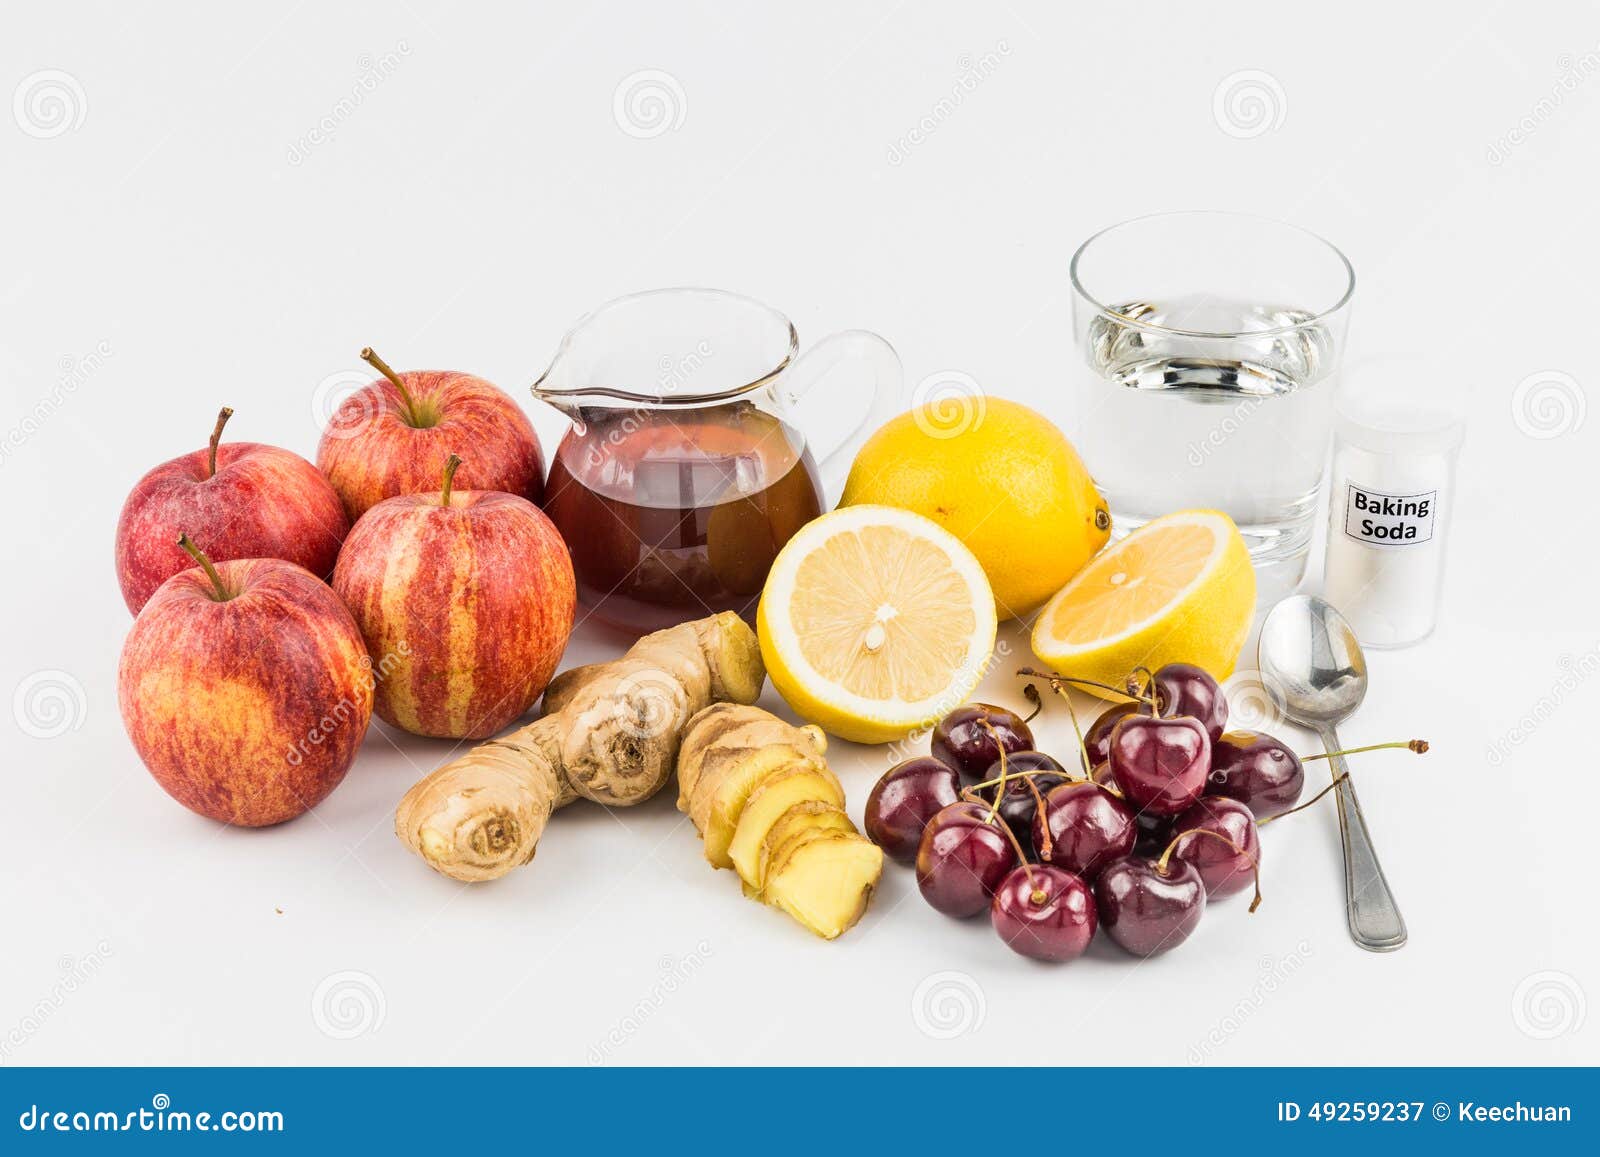 common home remedy to treat gout inflammation - cherries, lemon juice, apple cider vinegar, ginger roots, baking soda